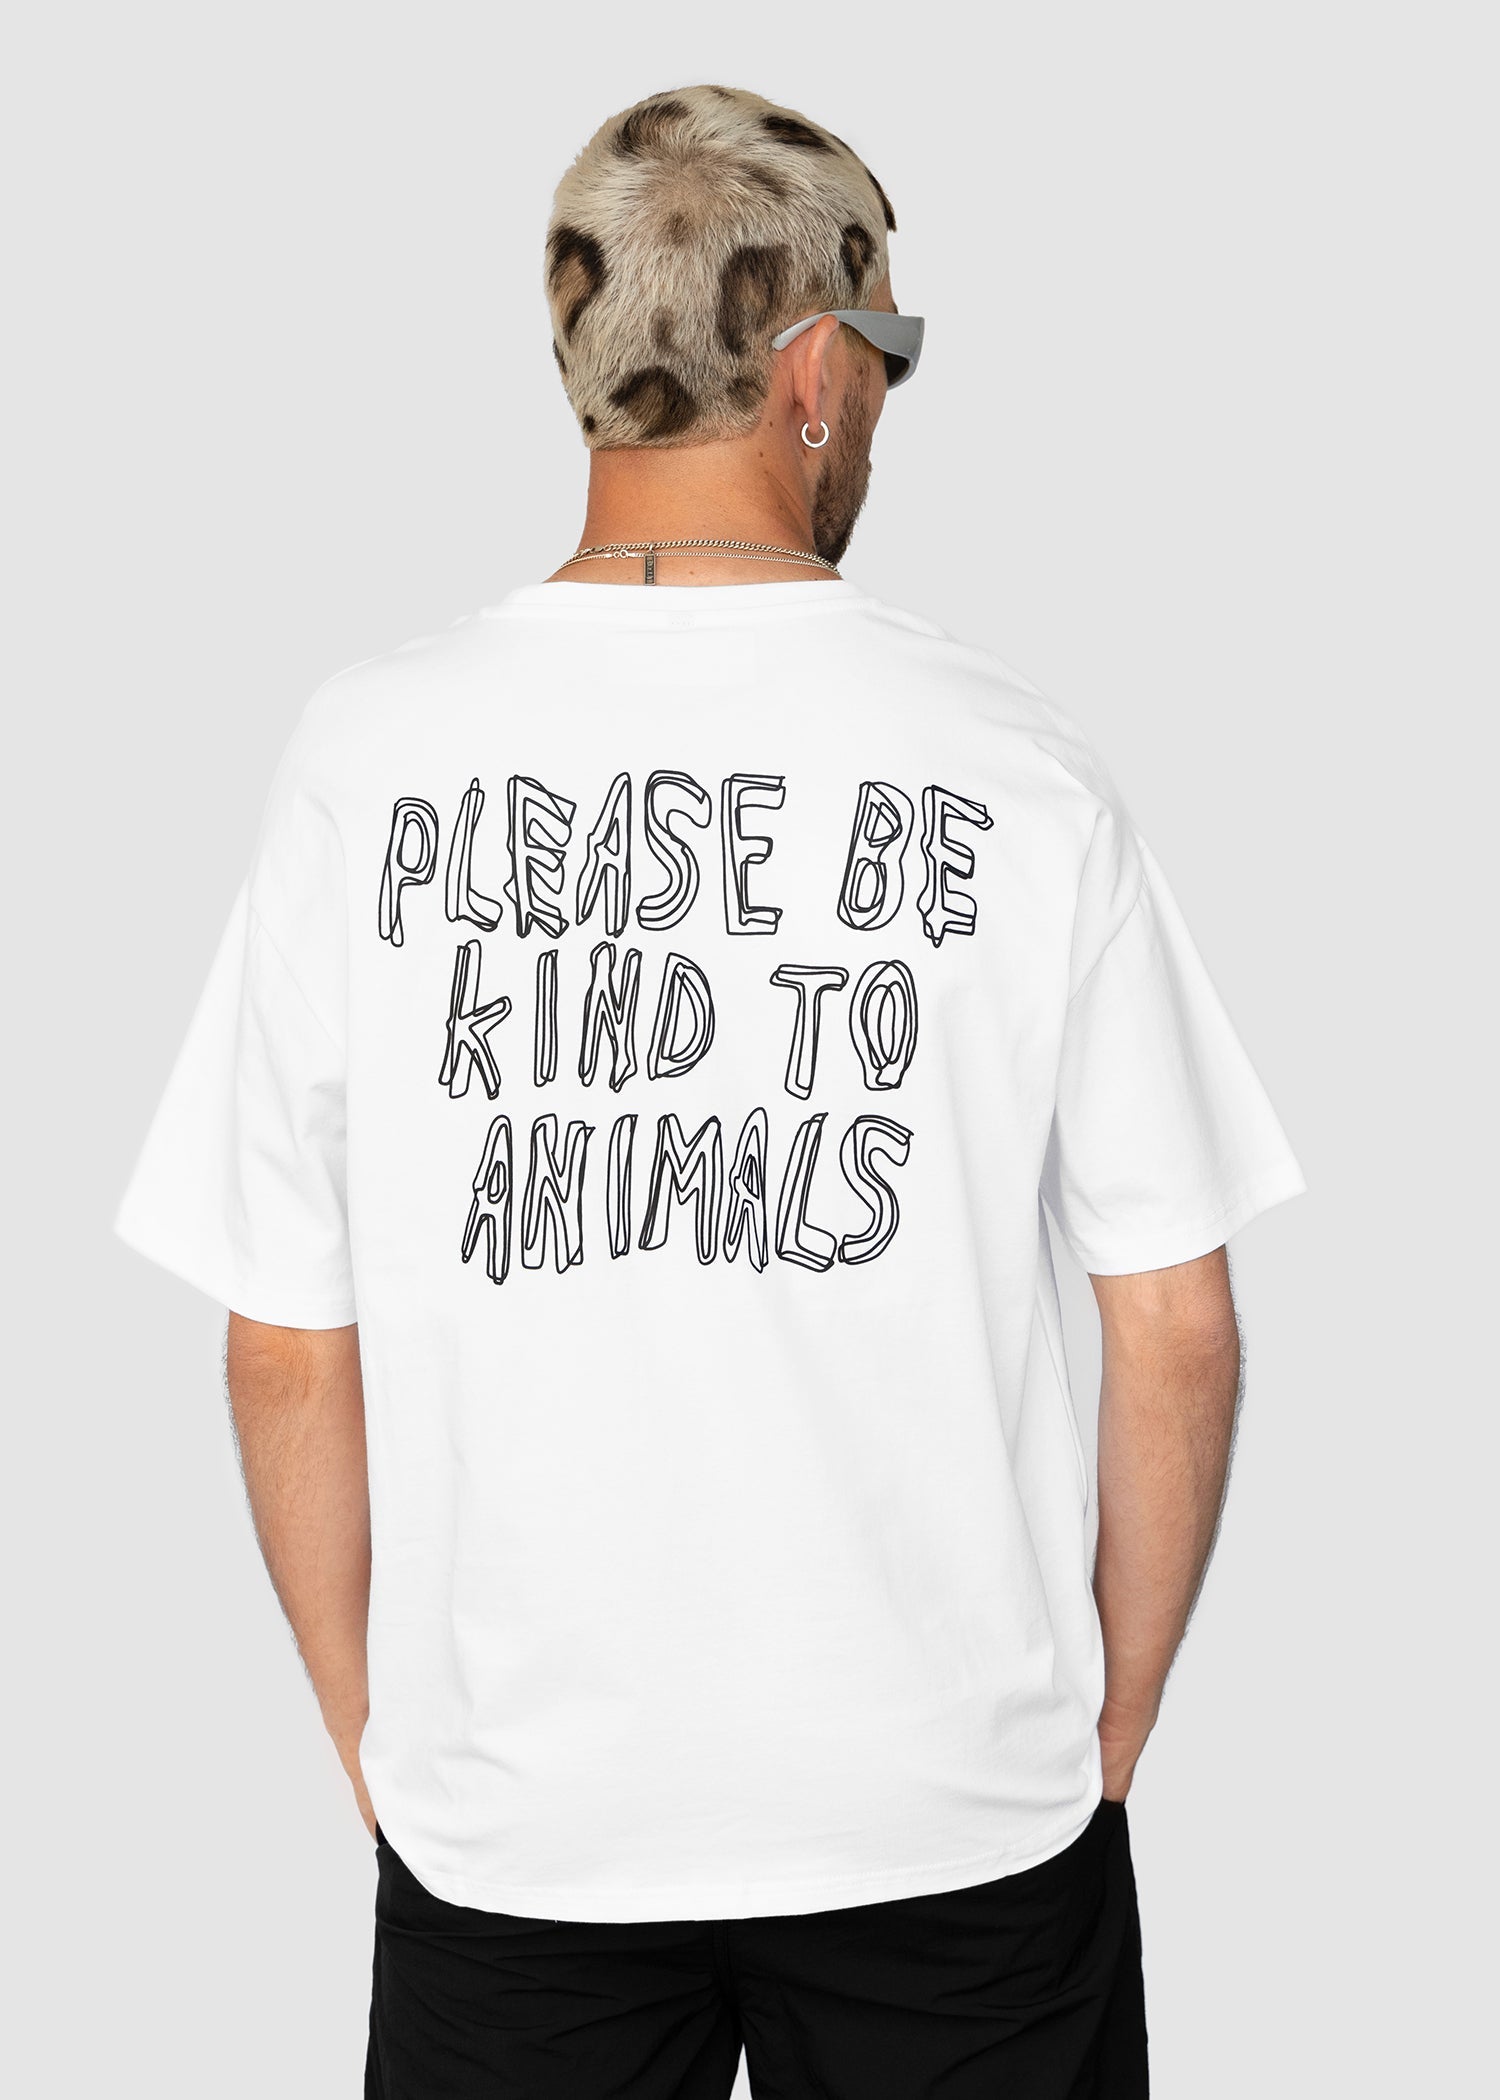 PLEASE BE KIND TO ANIMALS TEE